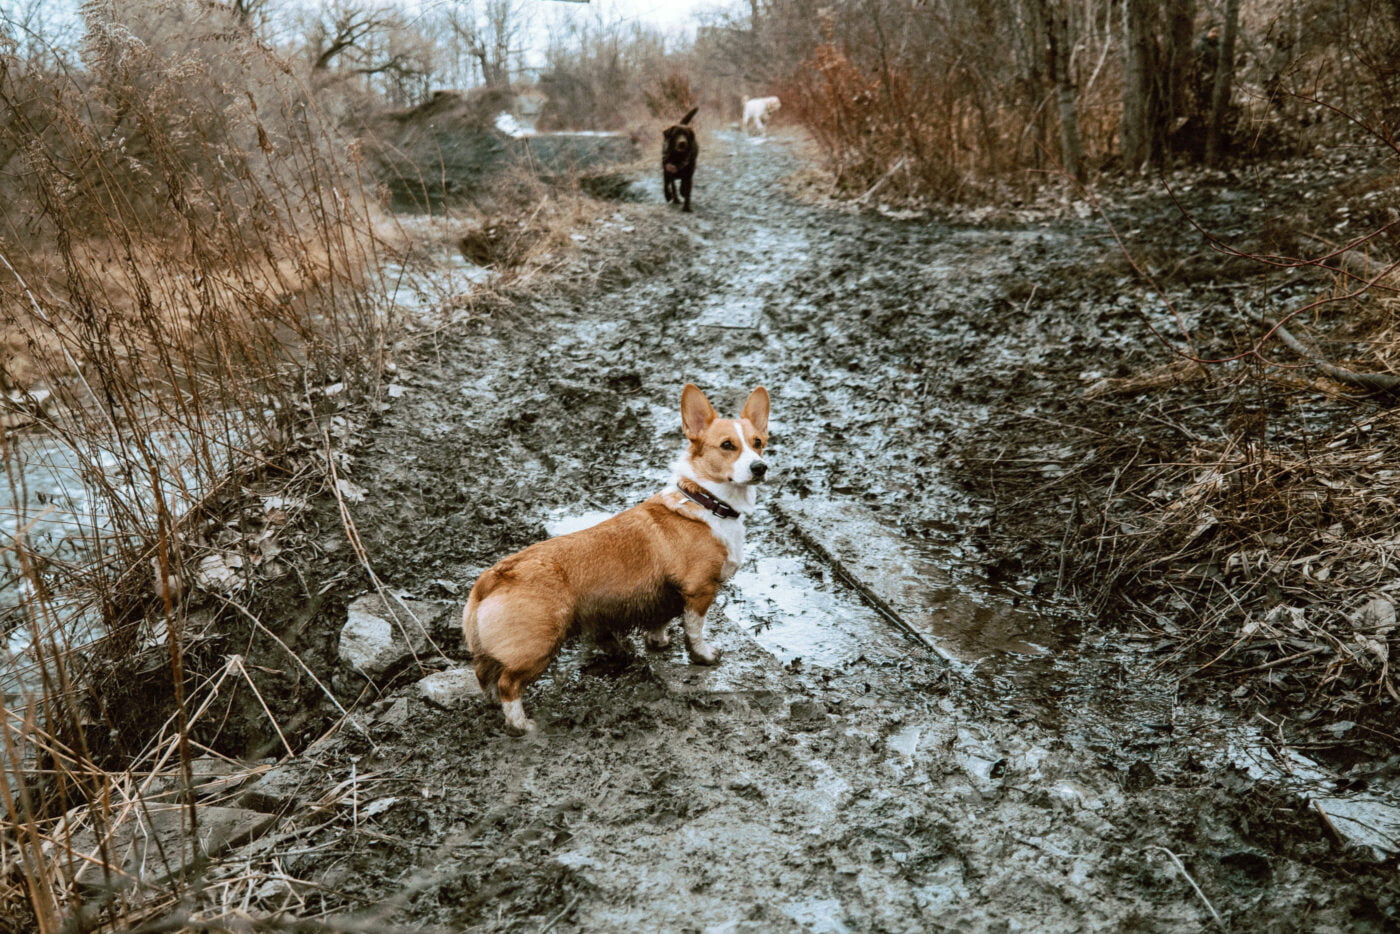 4 Dog Parks in Toronto Where You Can Avoid Spring Mud Puddles (According to Google Reviews)